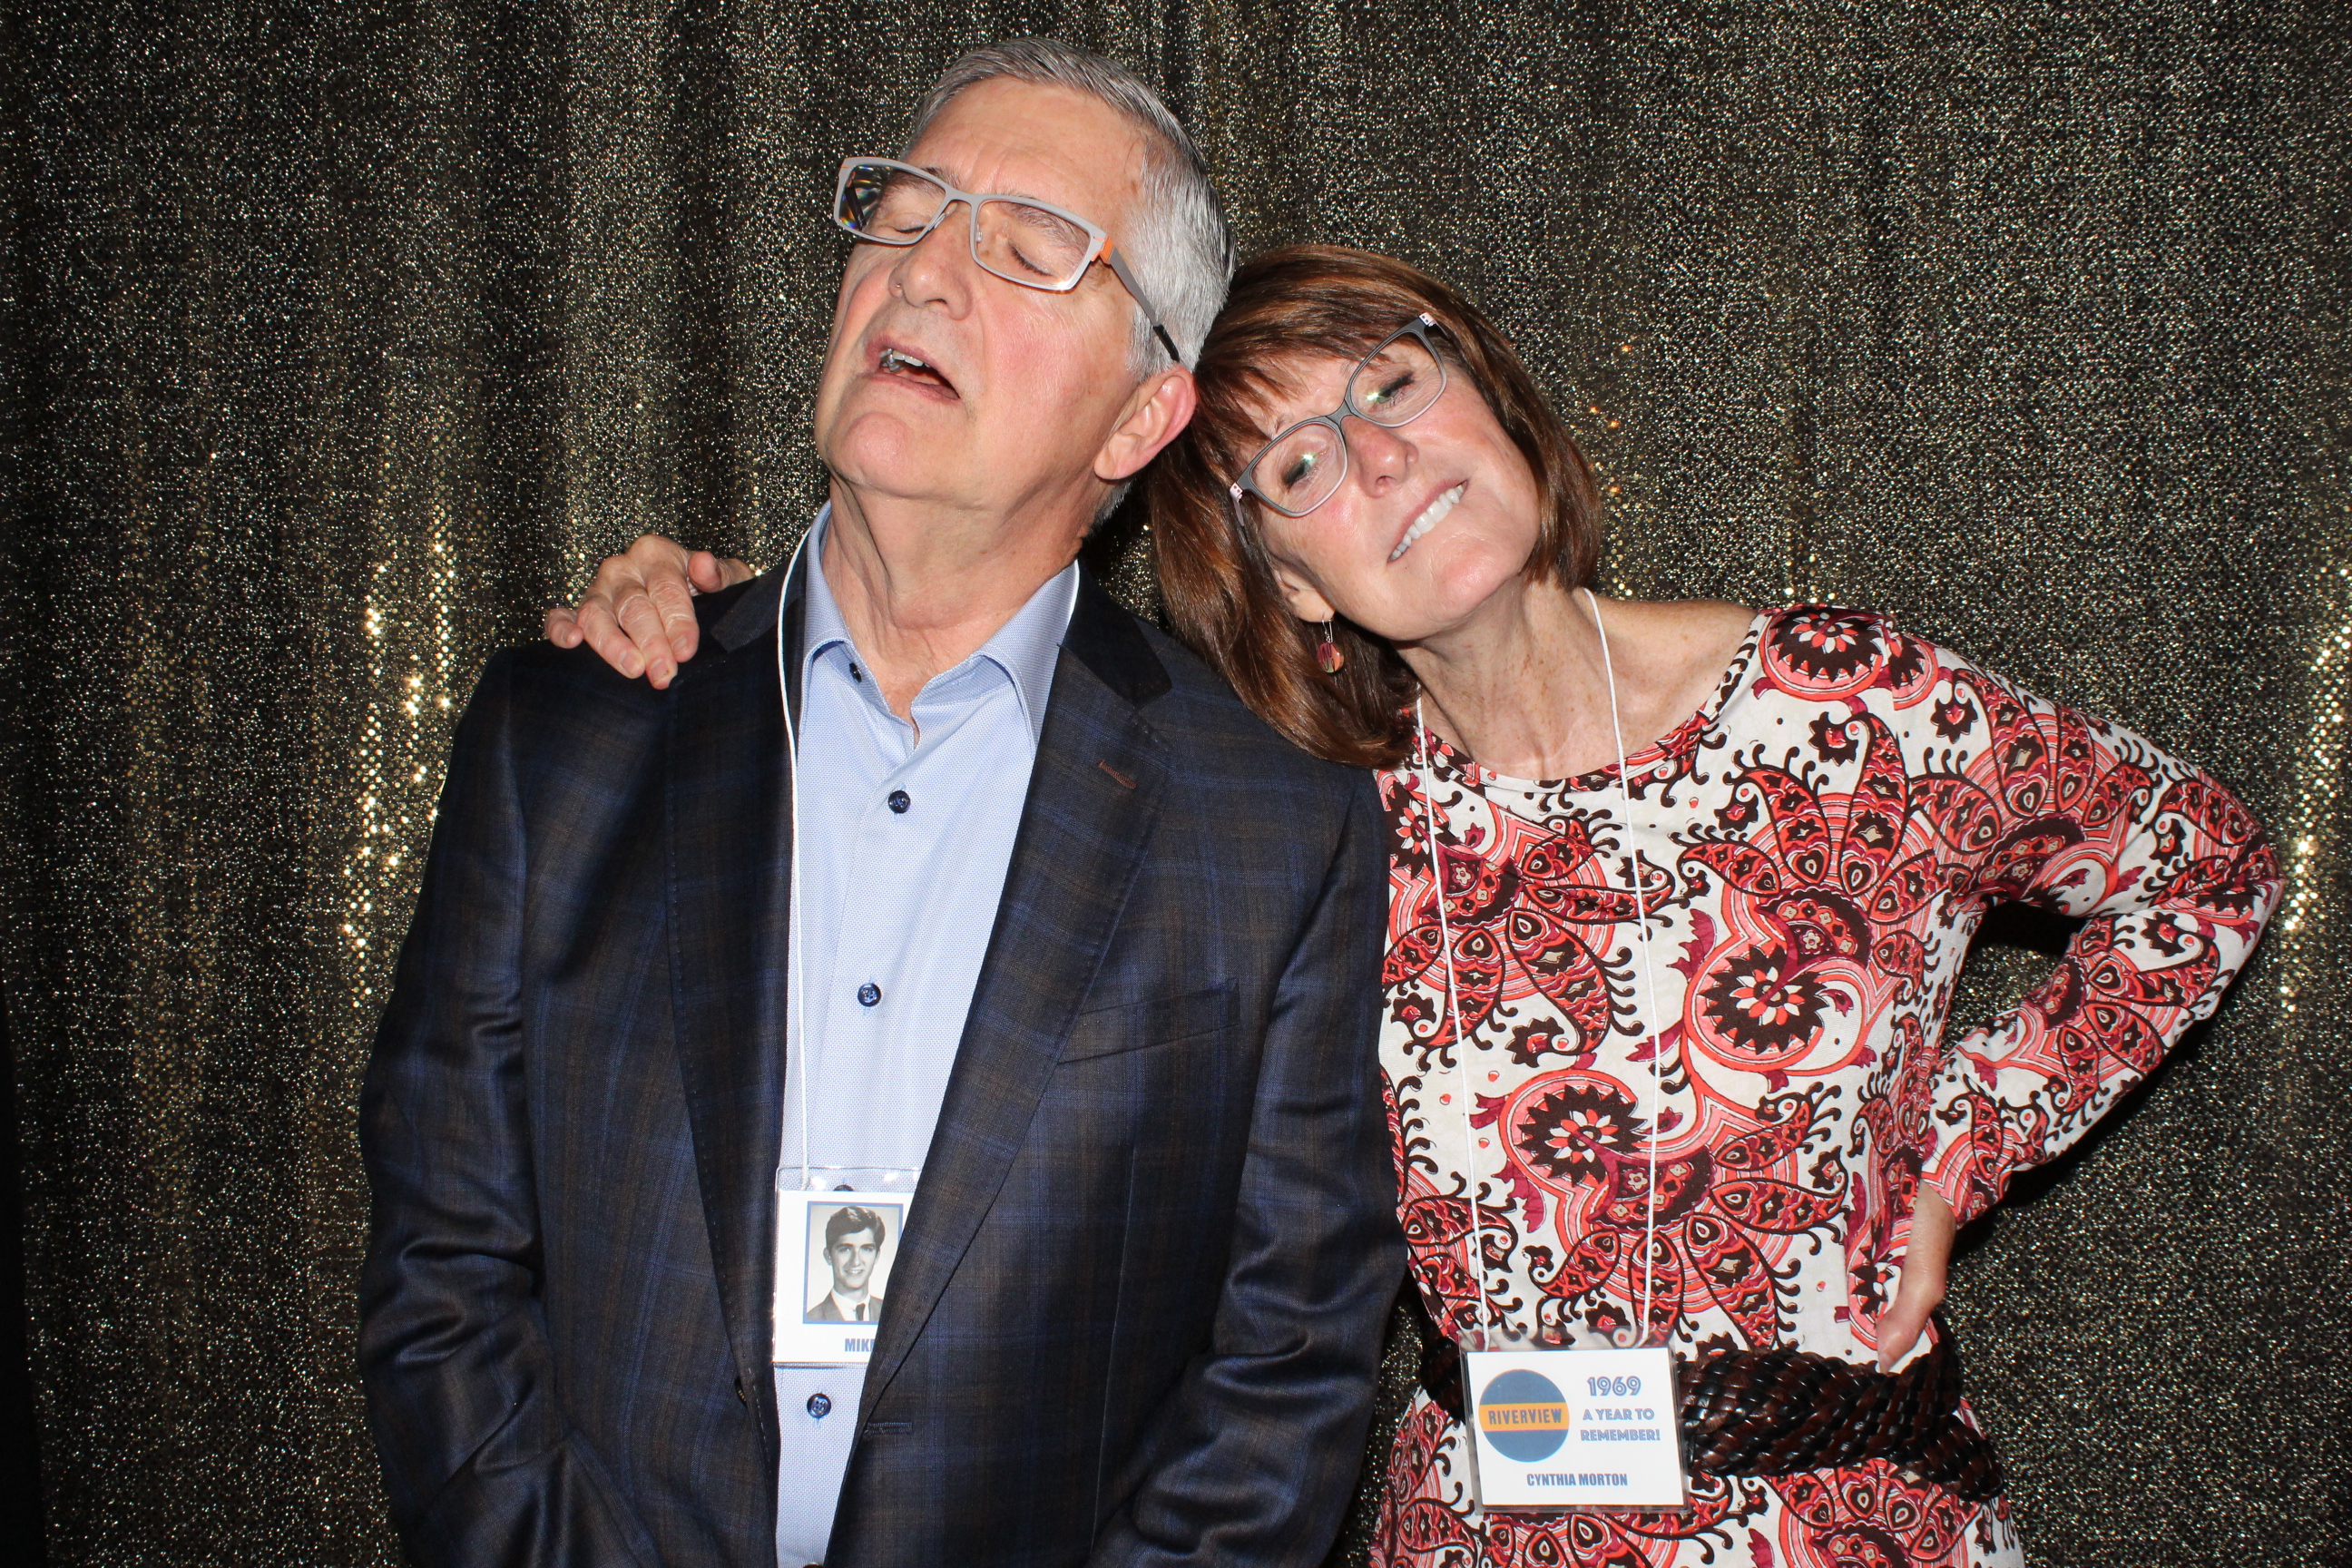 PHOTO BOOTH: Mike McGuire and Cynthia Morton